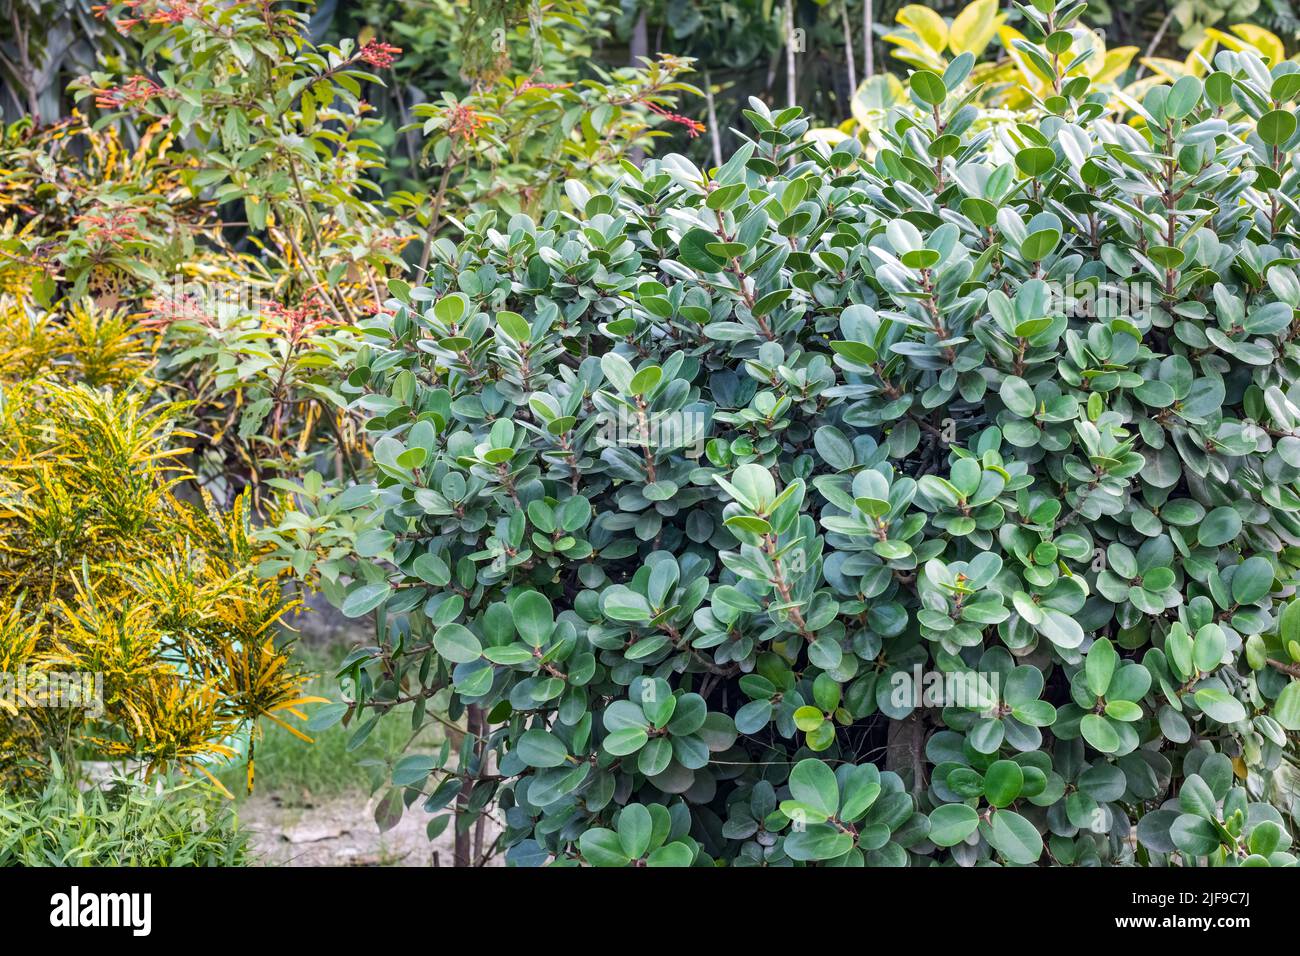 Green decorative plants in the yard garden close up Stock Photo